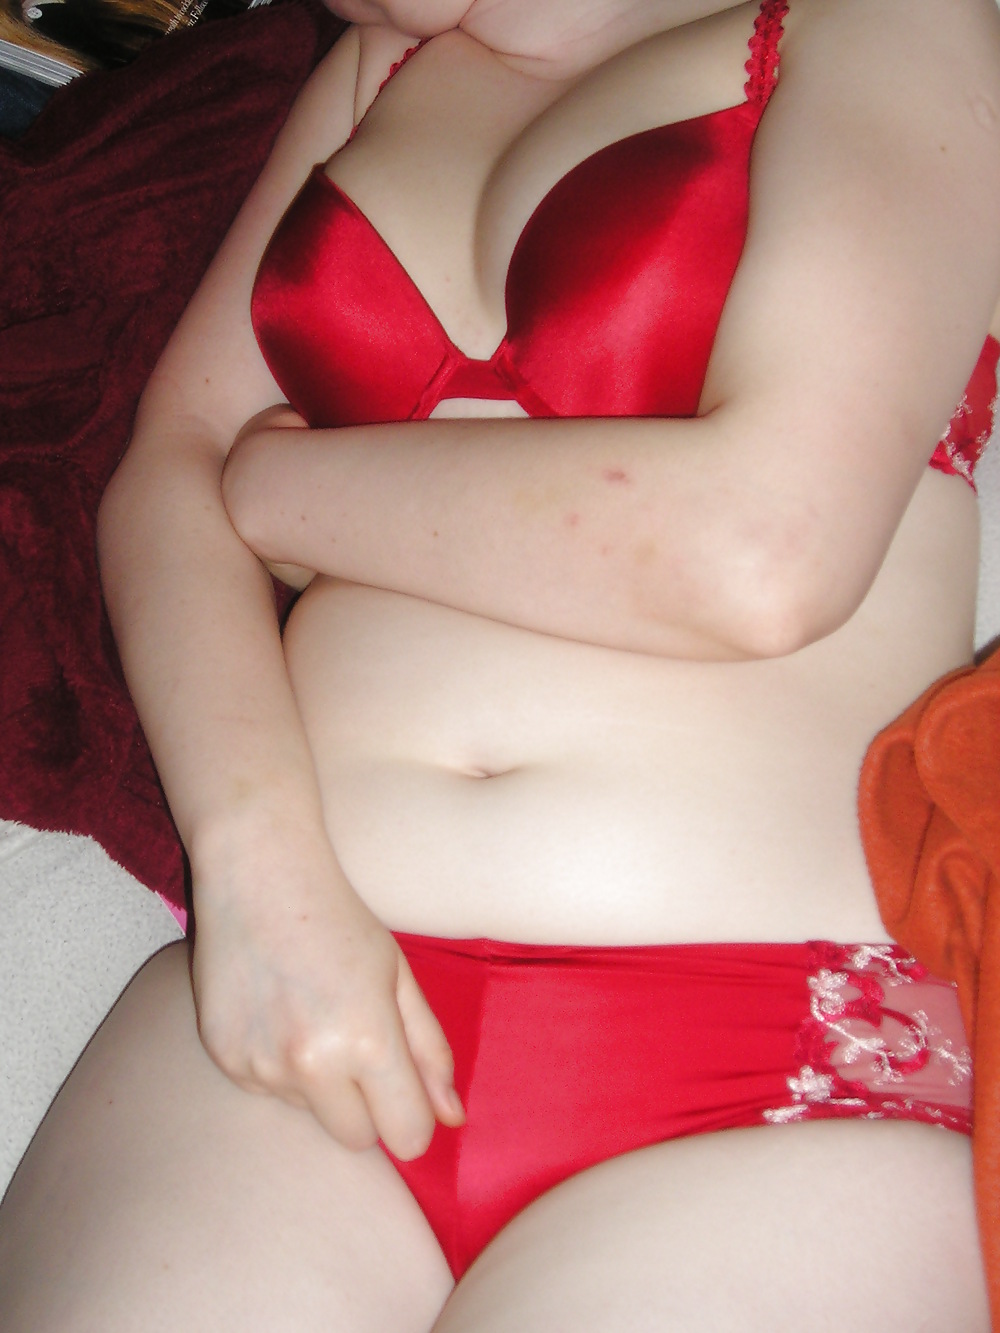 Red undies and totally naked adult photos